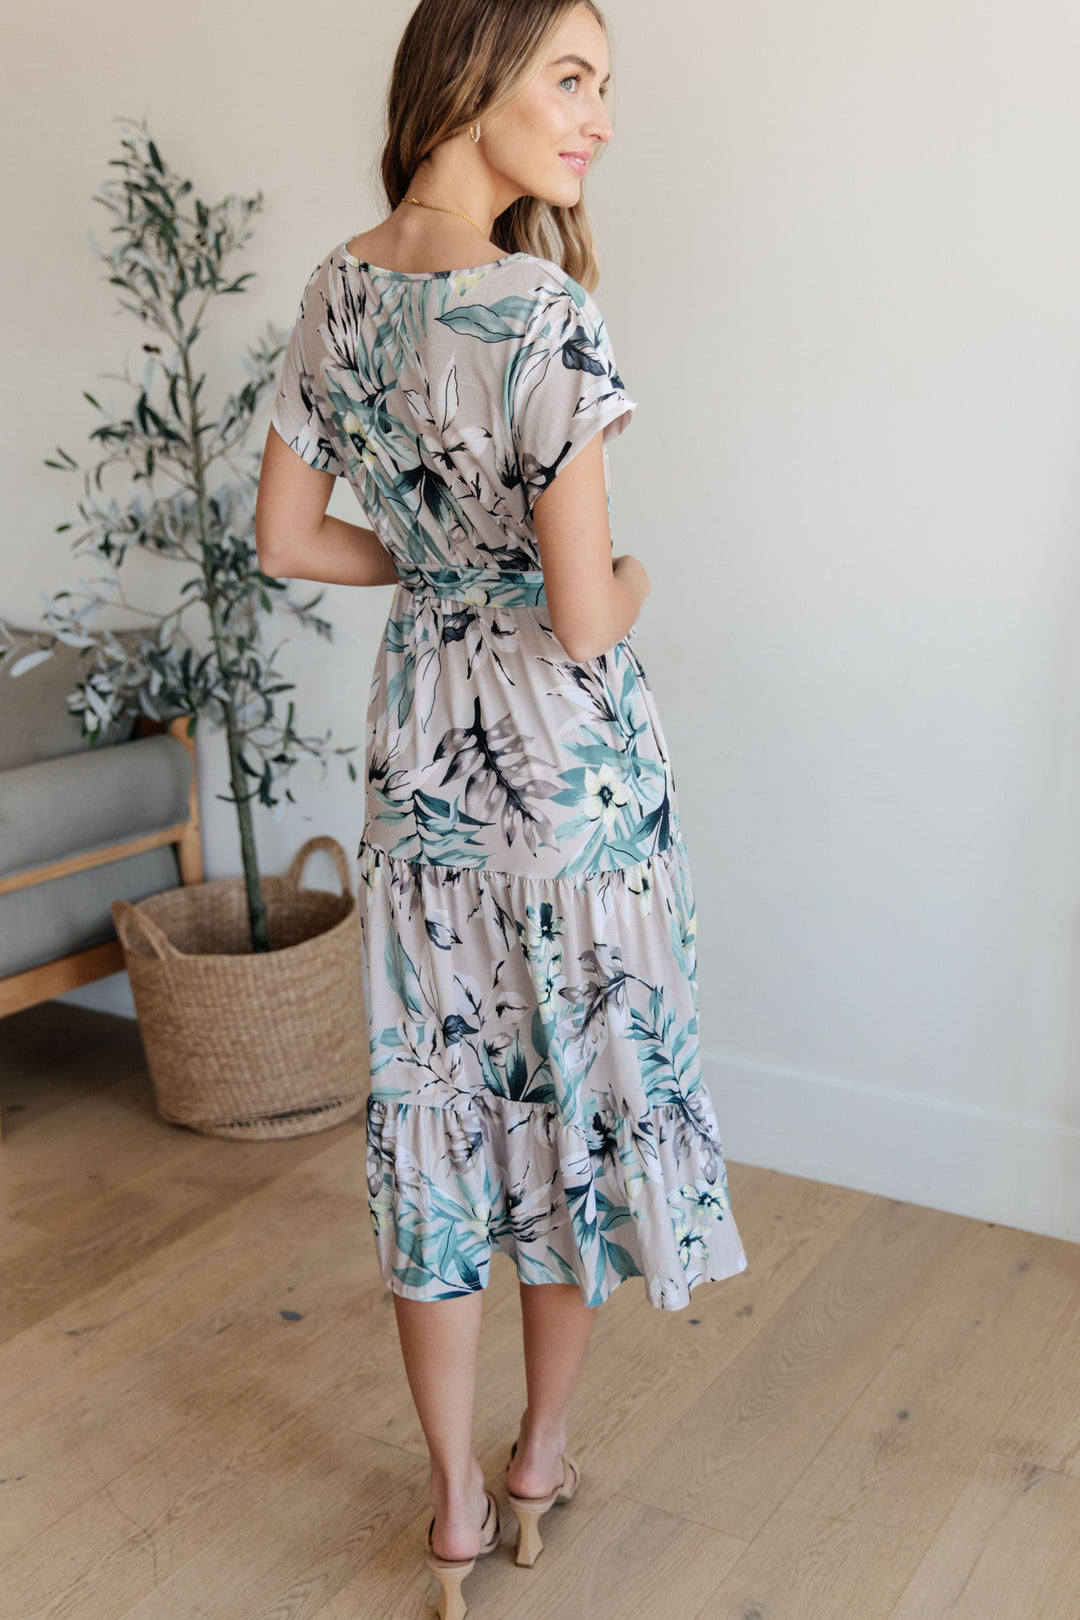 Into the Night Dolman Sleeve Floral Dress-Dresses-Inspired by Justeen-Women's Clothing Boutique in Chicago, Illinois